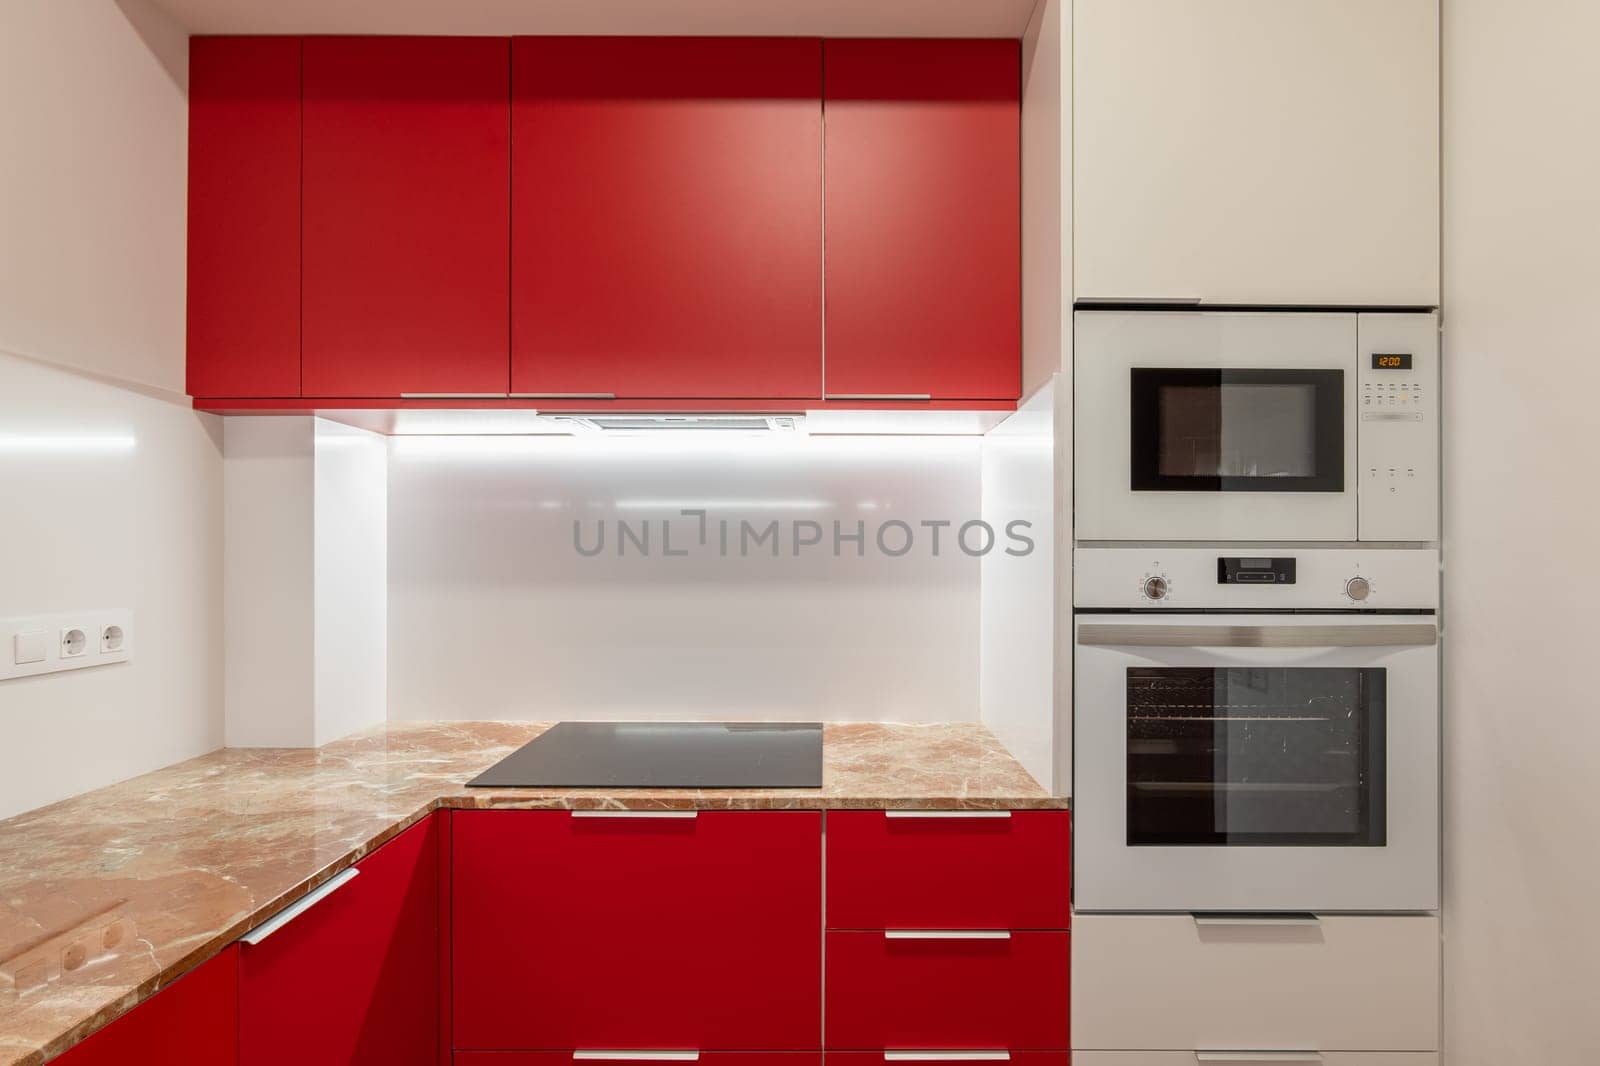 Sleek and modern kitchen design with red cabinets and marble surfaces